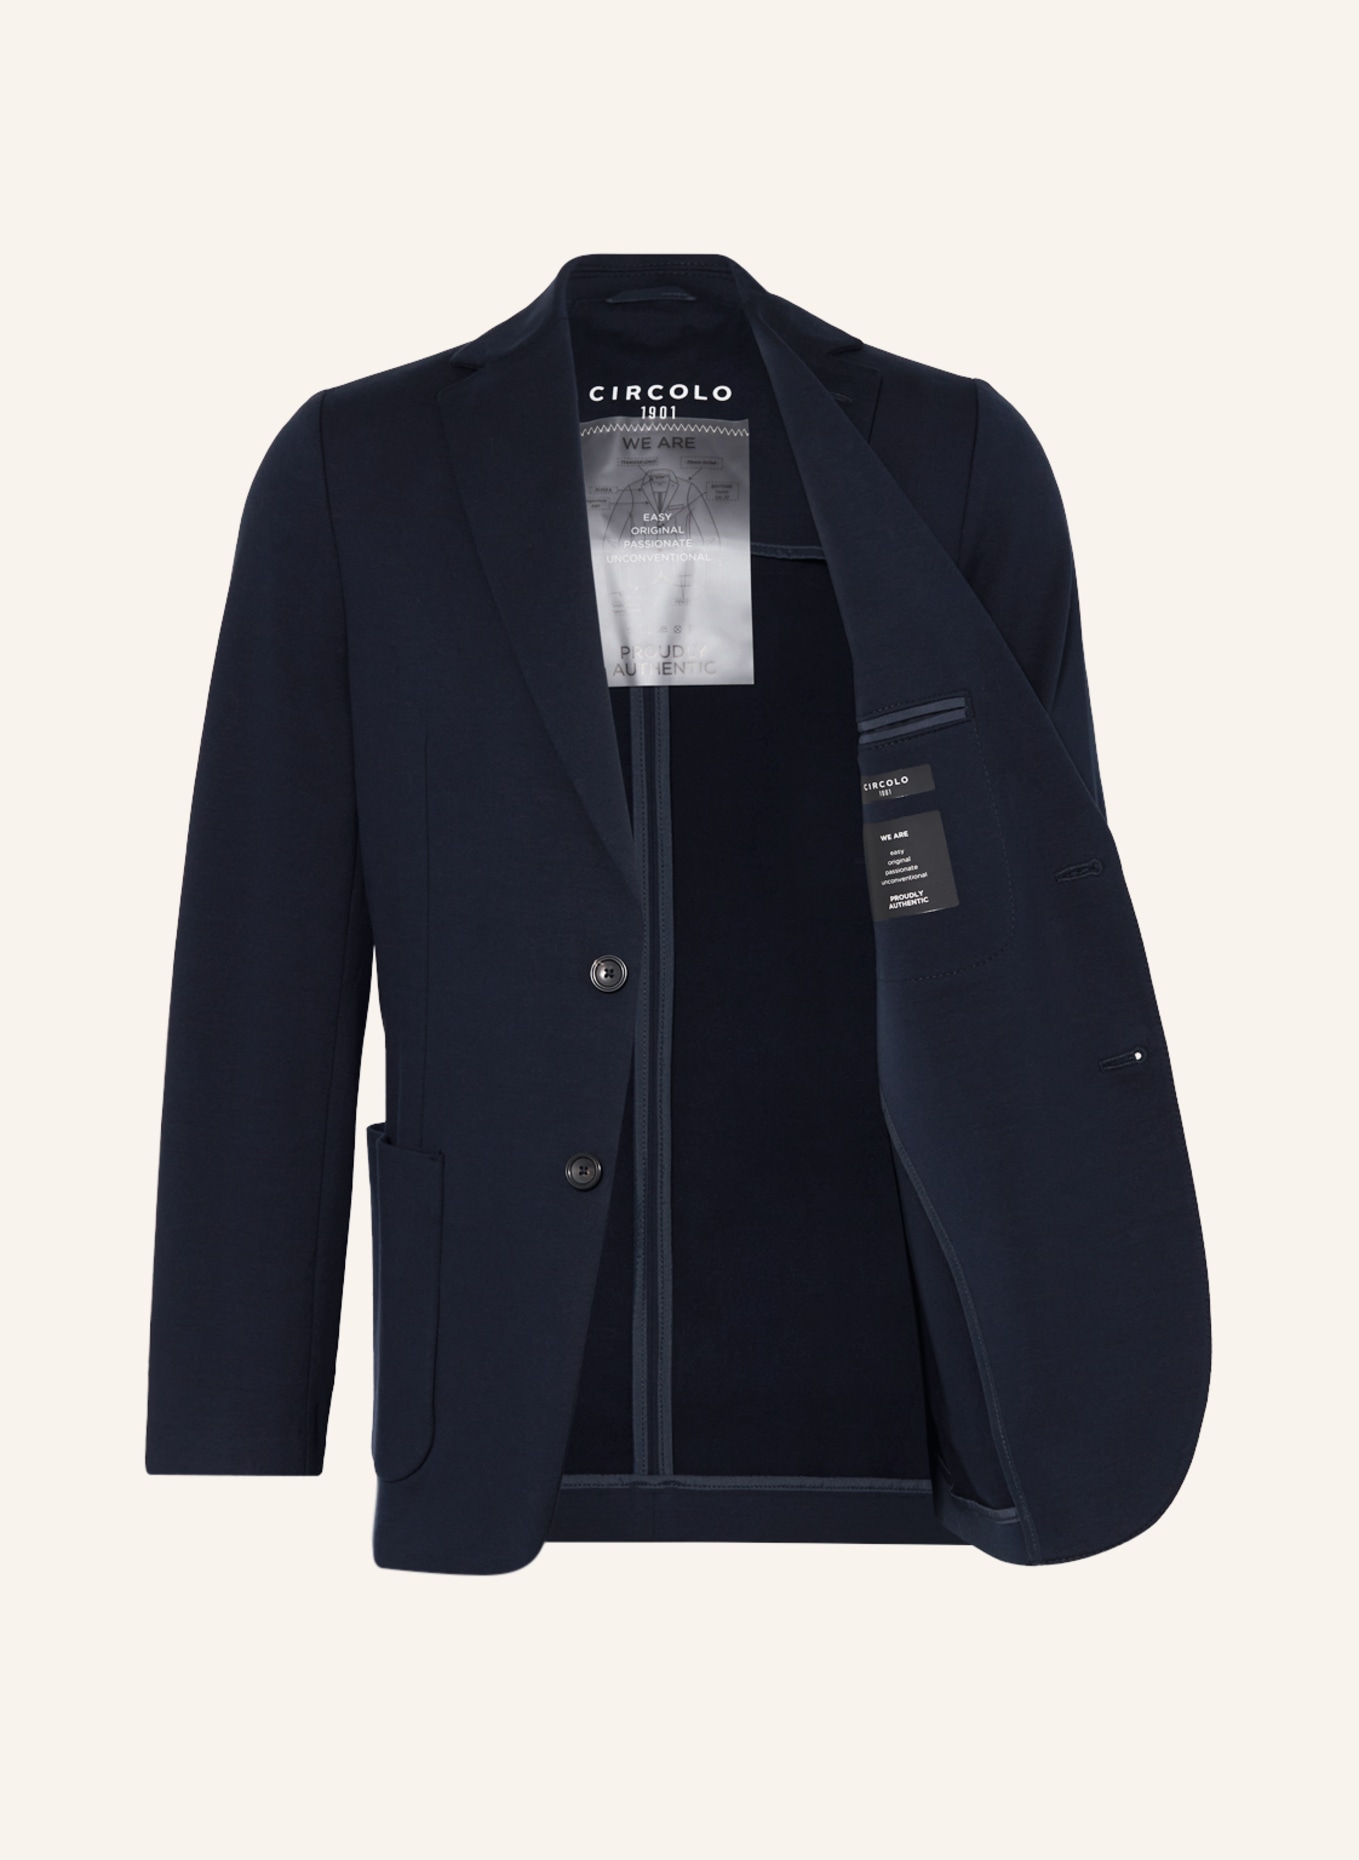 CIRCOLO 1901 Suit jacket extra slim fit made of jersey, Color: 447 Blu Navy (Image 4)